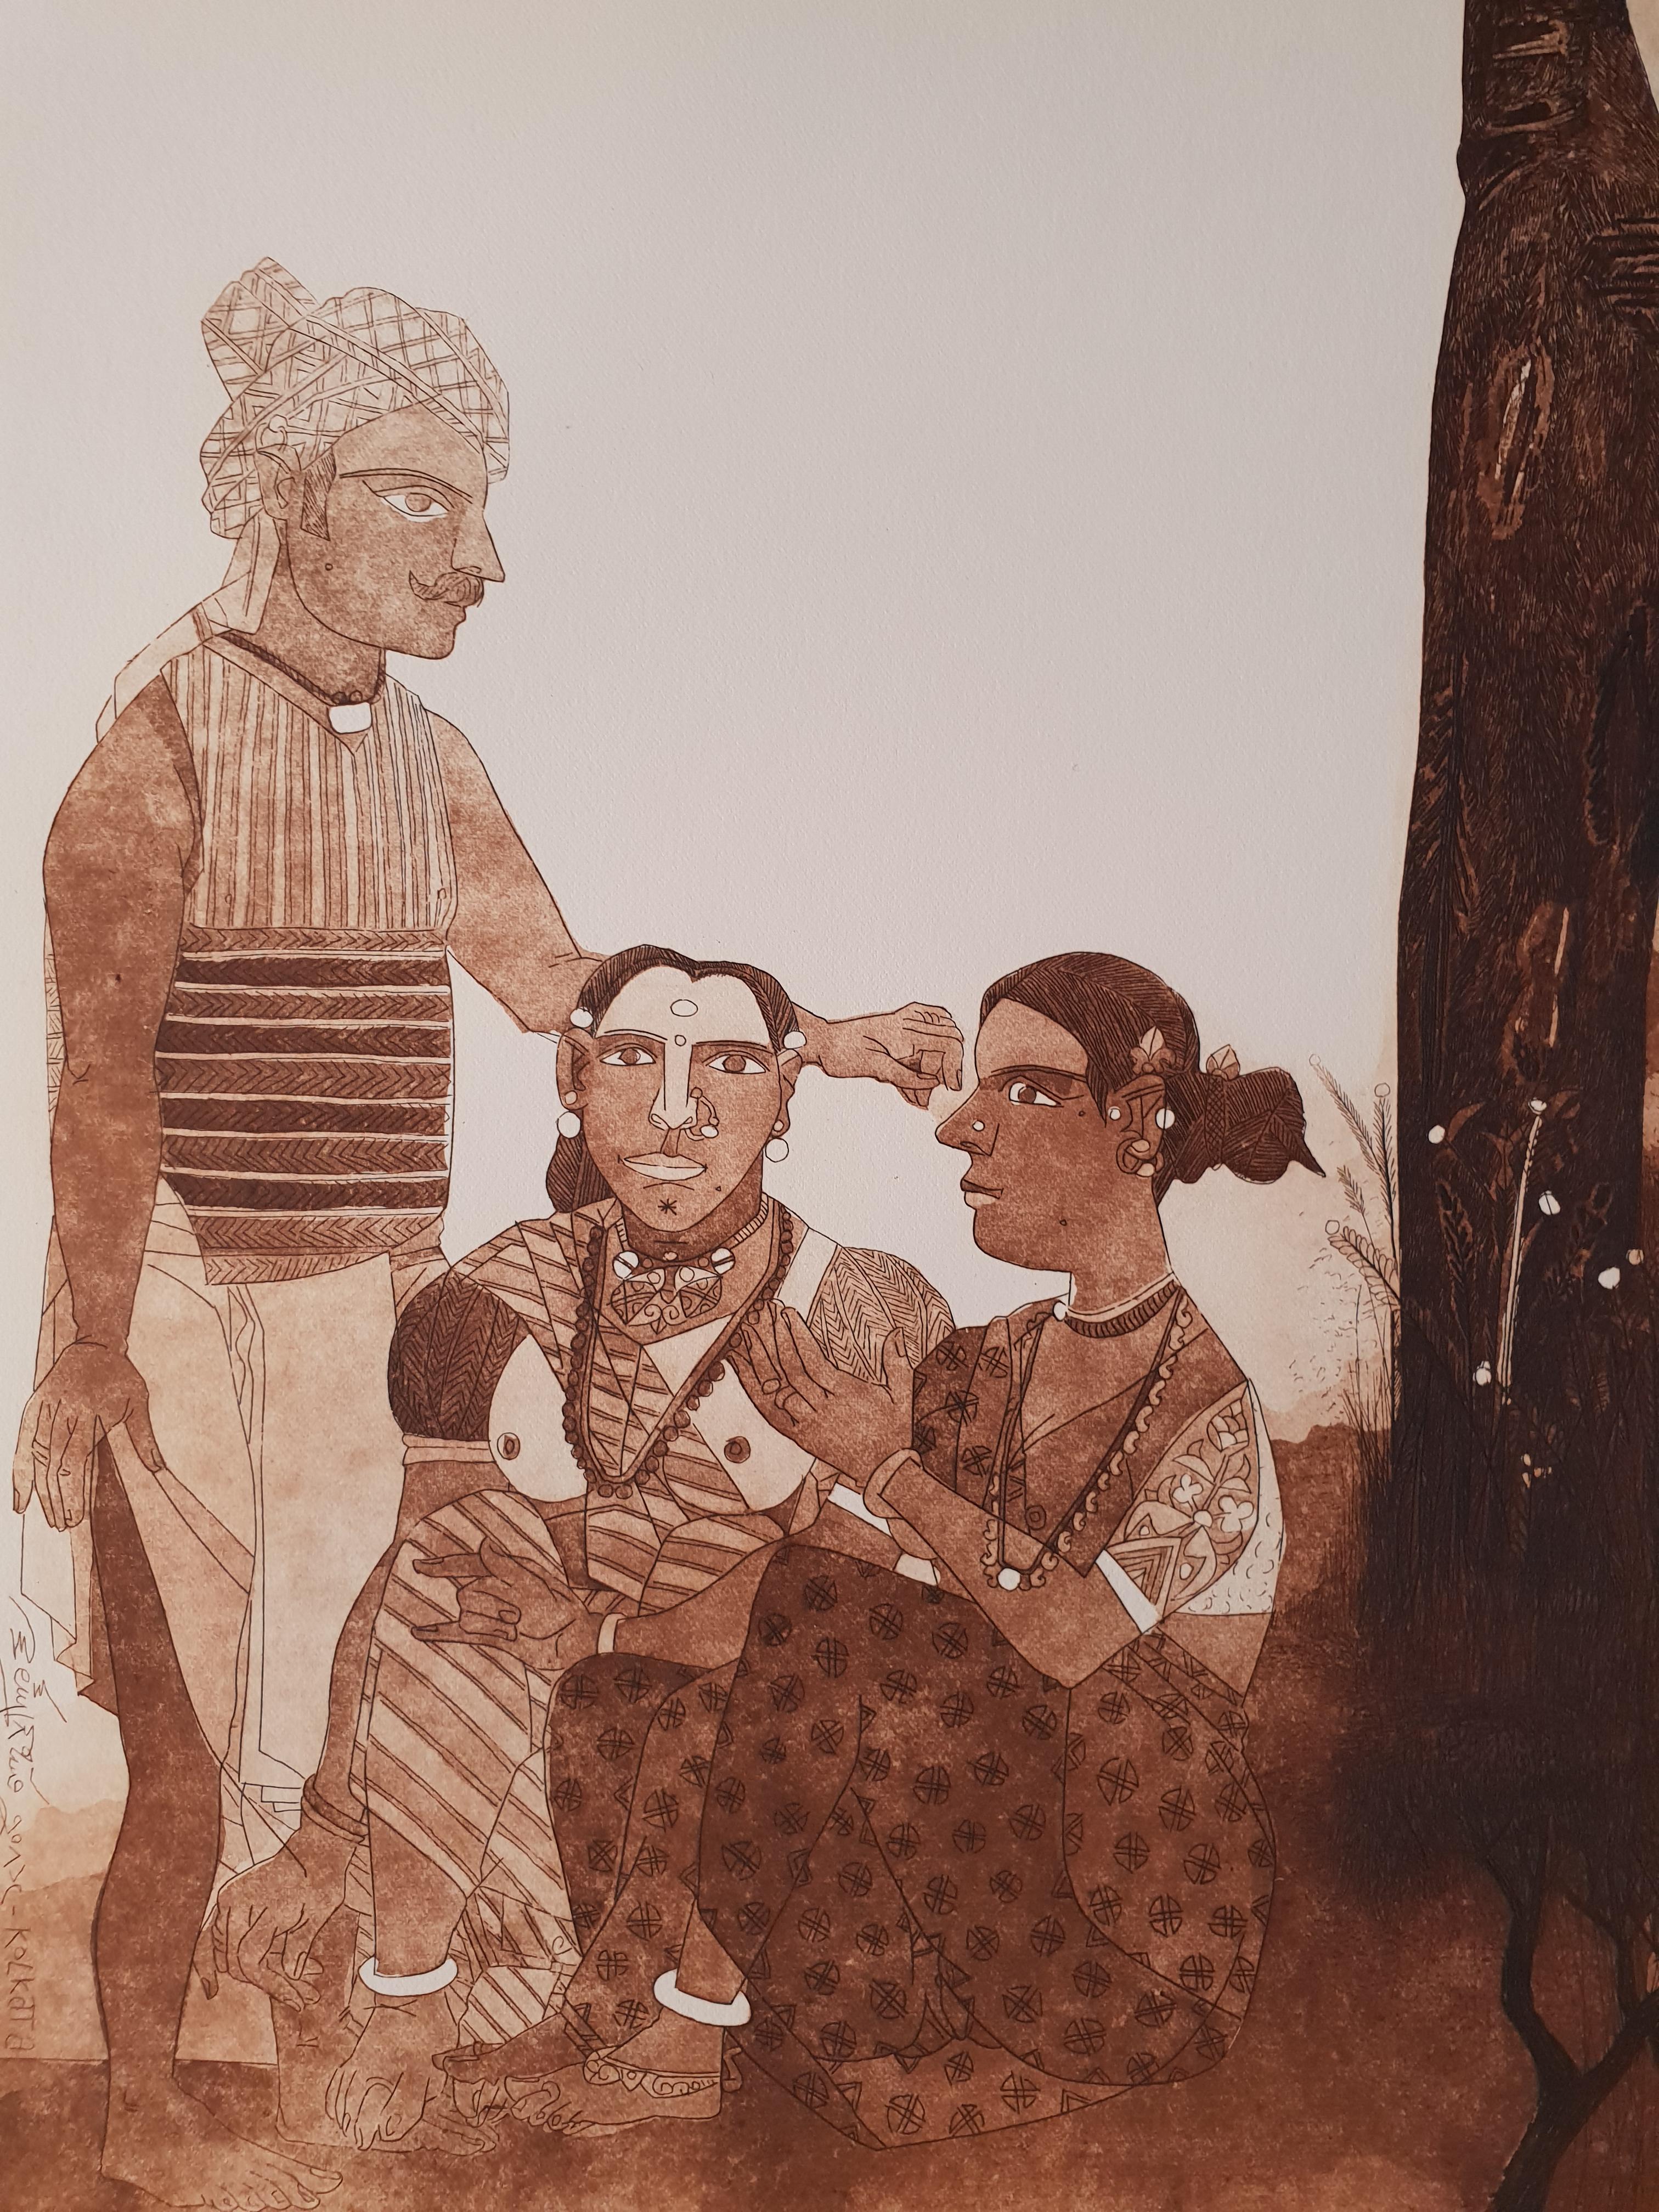 Rural South Indian Man-Woman, Painting, Etching in Sepia, Indian Artist